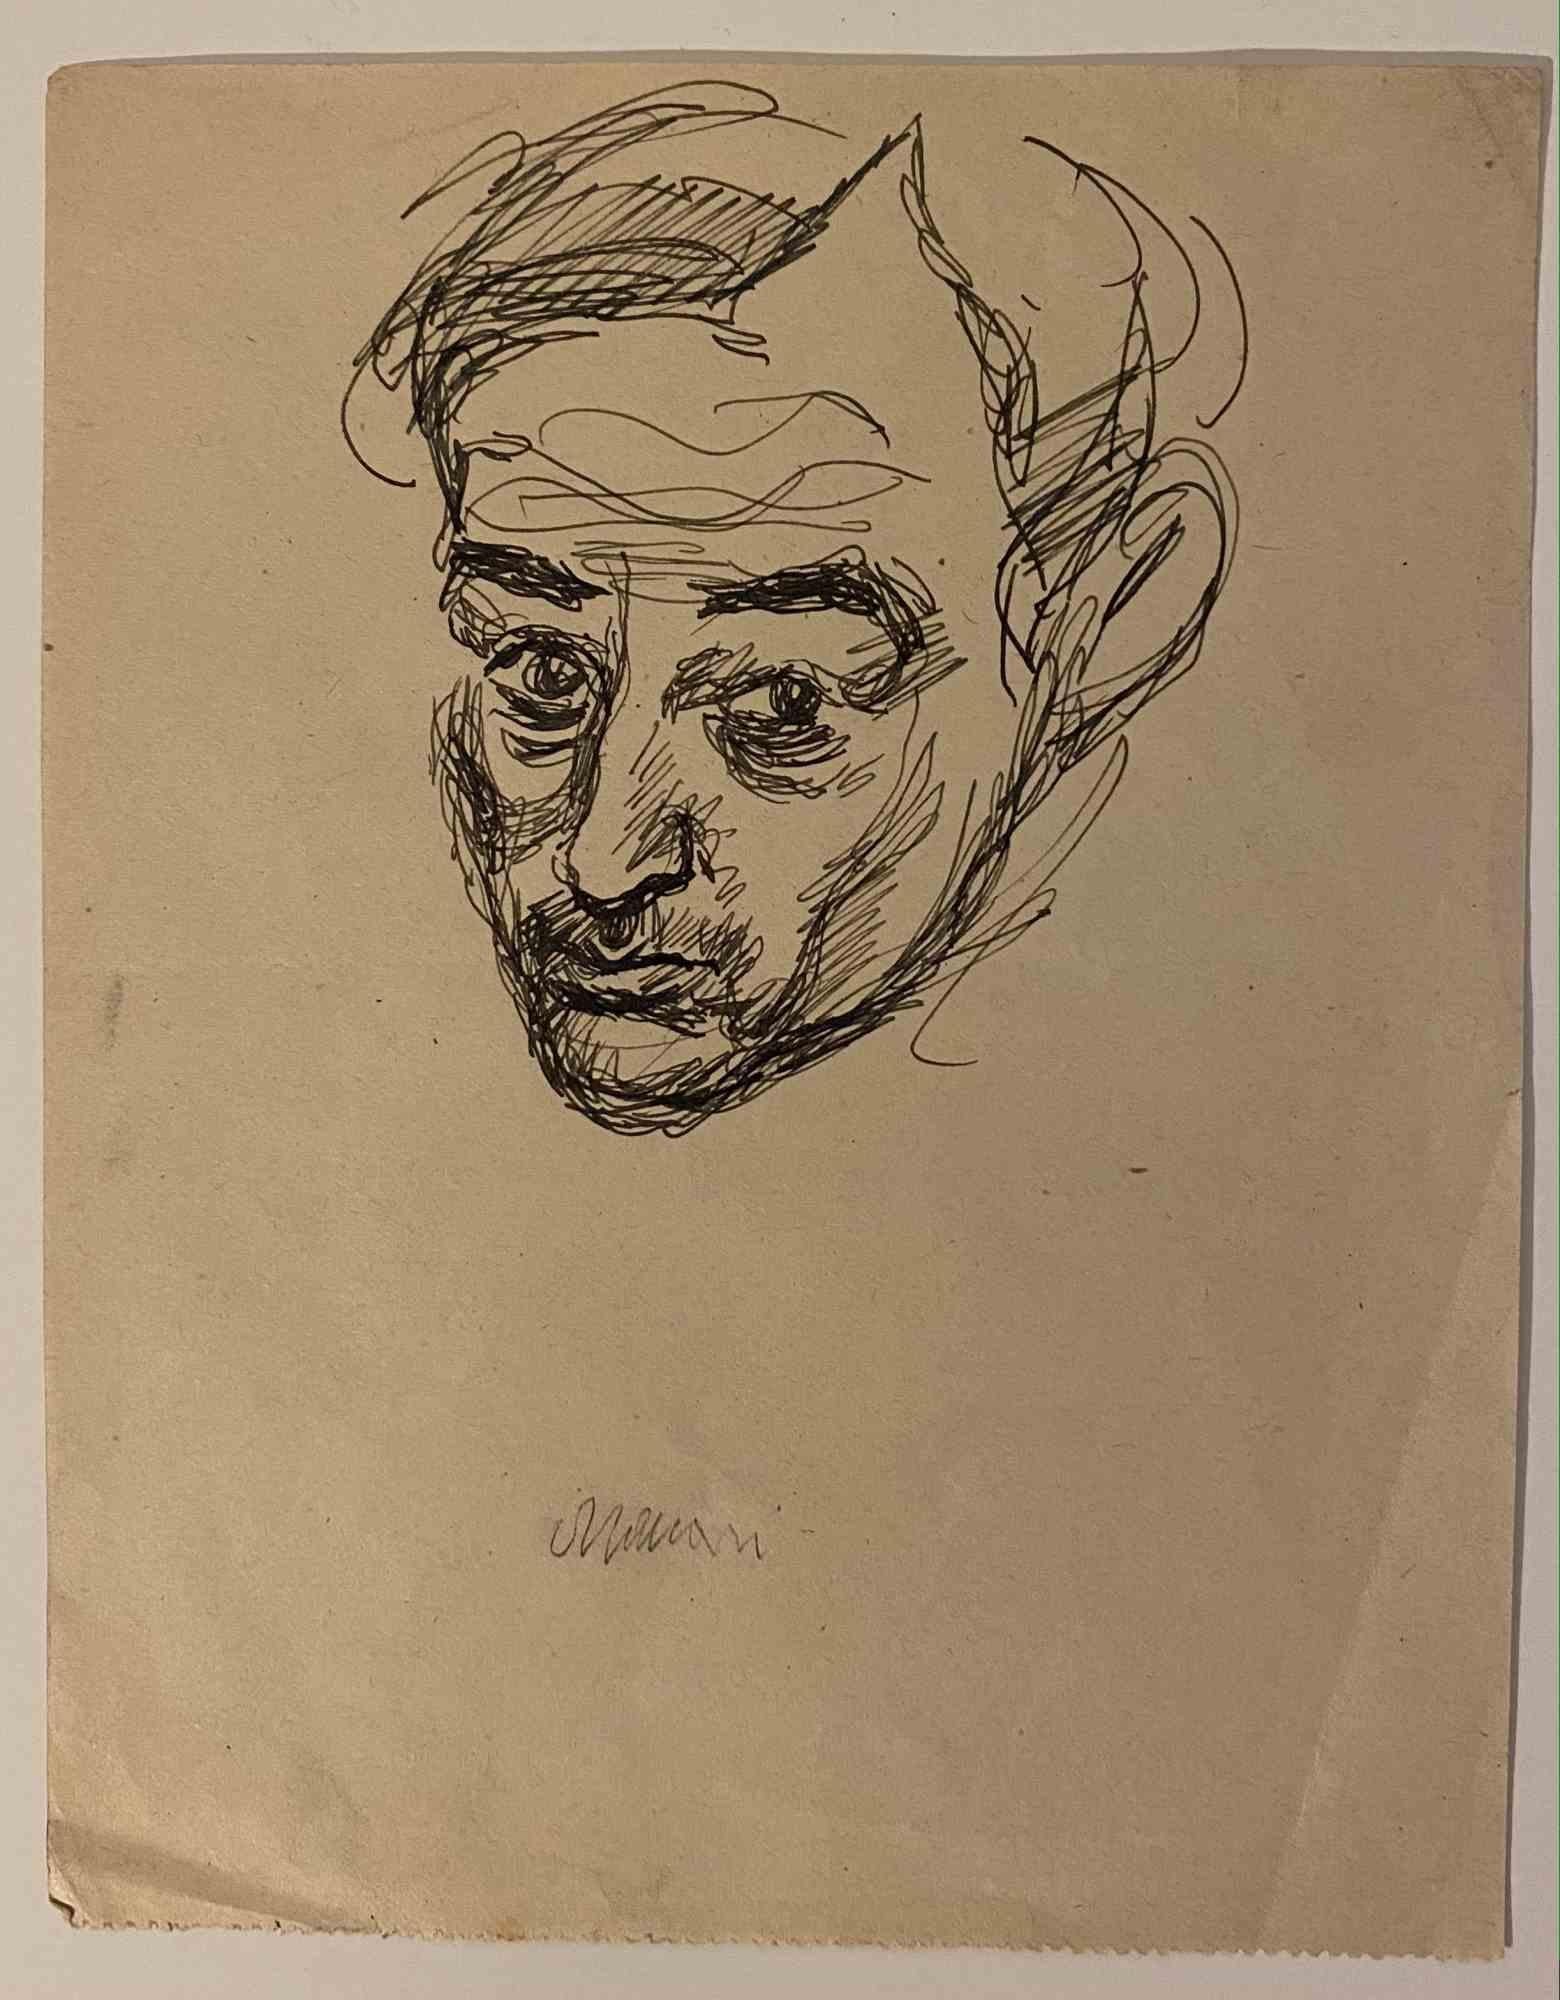 Portrait is an Original Drawing in pen on creamy-colored paper realized by Mino Maccari in the mid-20th century. 

Hand-signed by the artist on the lower. 

Good conditions.

Mino Maccari (1898-1989) was an Italian writer, painter, engraver, and